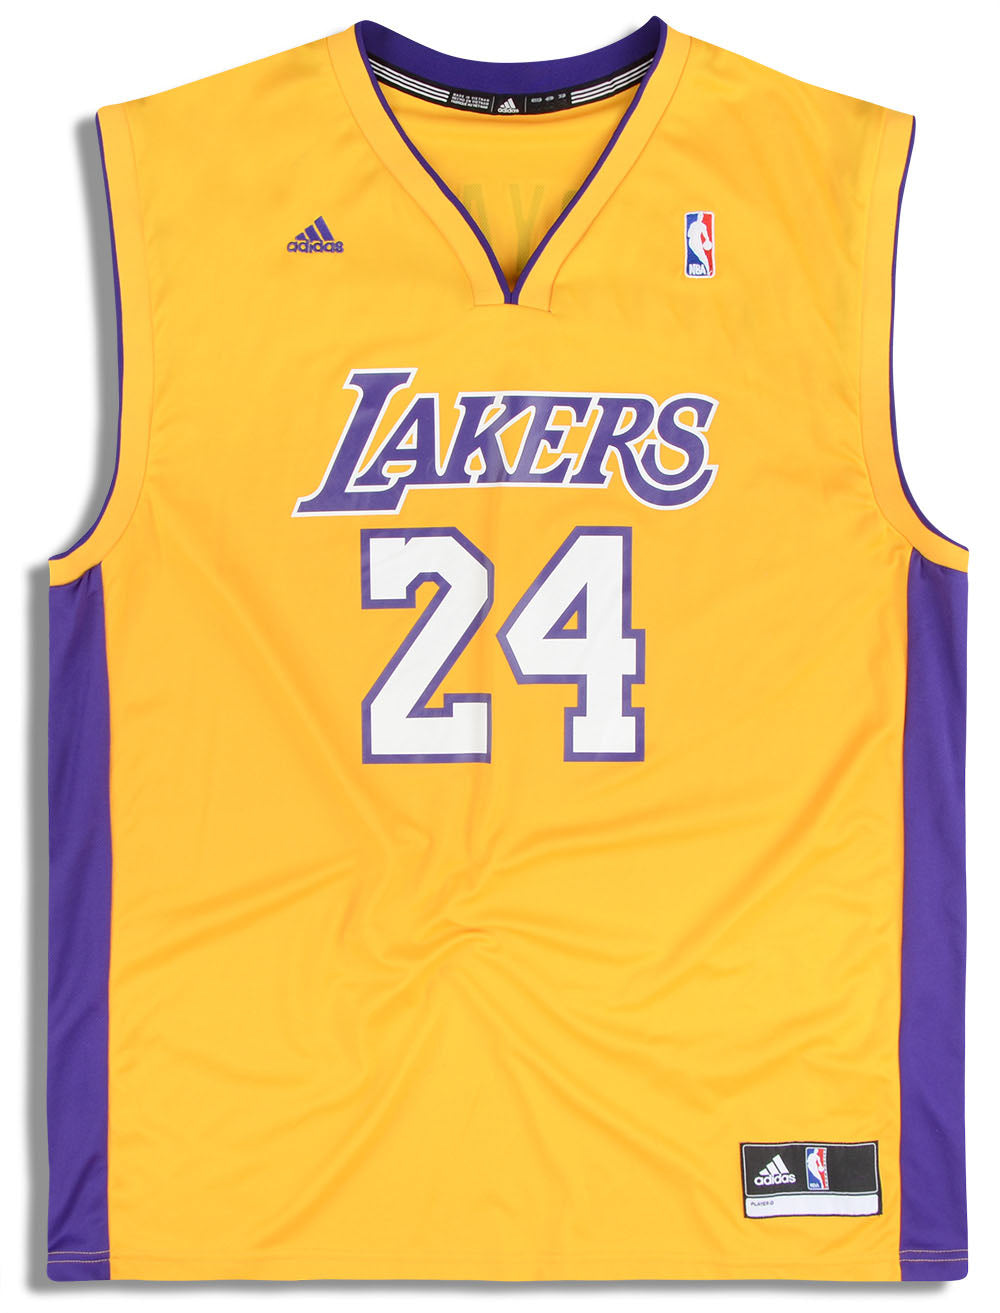 2010-14 LA LAKERS BRYANT #24 ADIDAS JERSEY (HOME) S - Classic